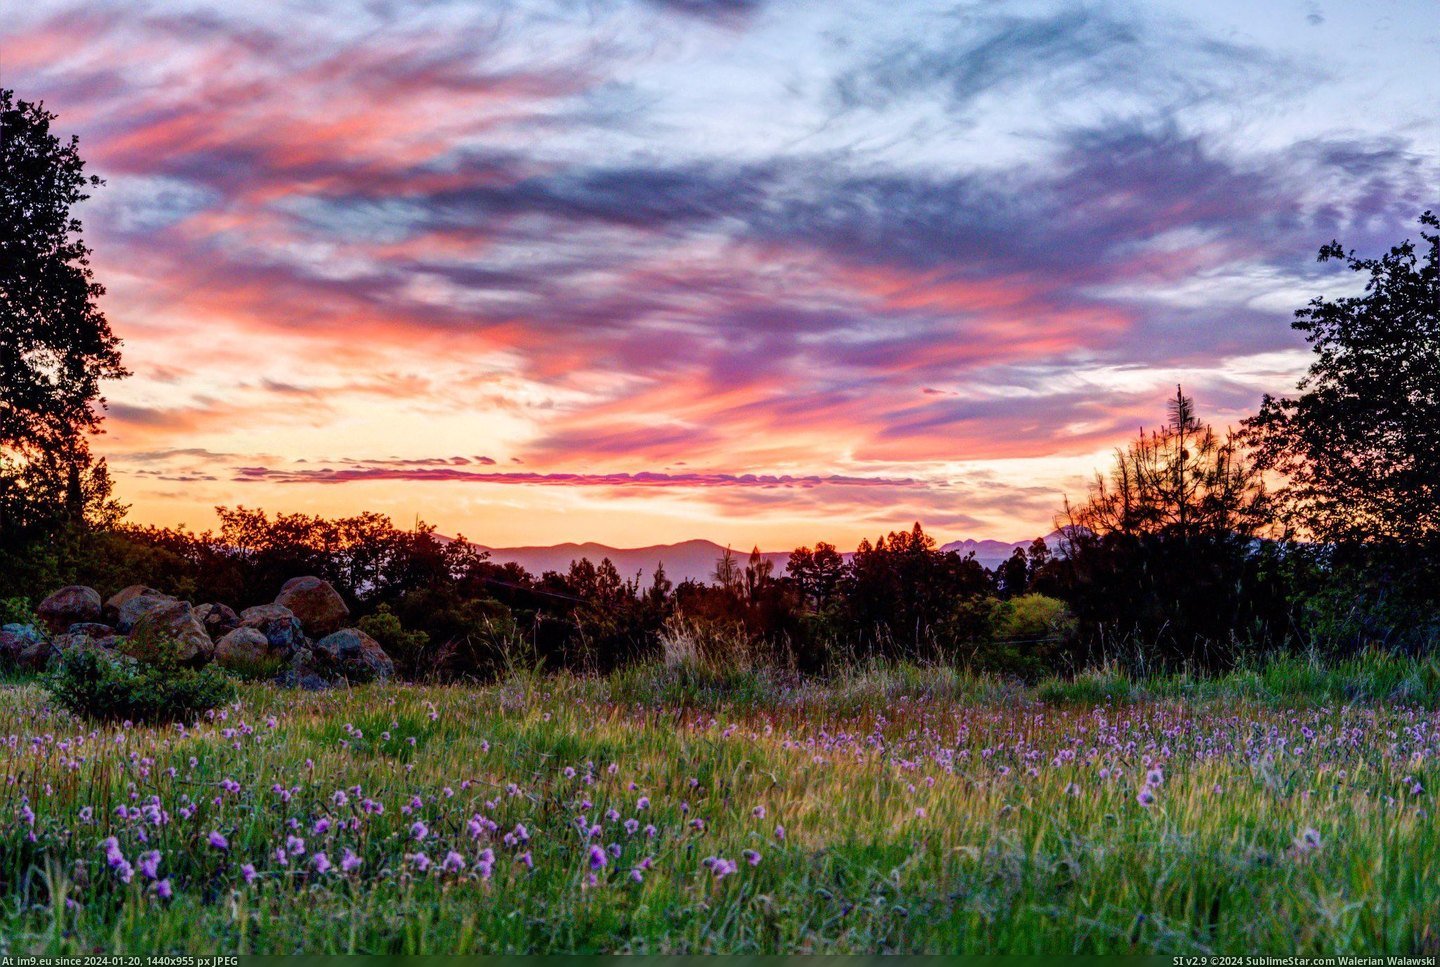 #One #Favorite #Backyard #Redding #California #Sunrise [Earthporn] One of my favorite sunrise pictures of my backyard in Redding California. [OC] [2048x1370] Pic. (Изображение из альбом My r/EARTHPORN favs))